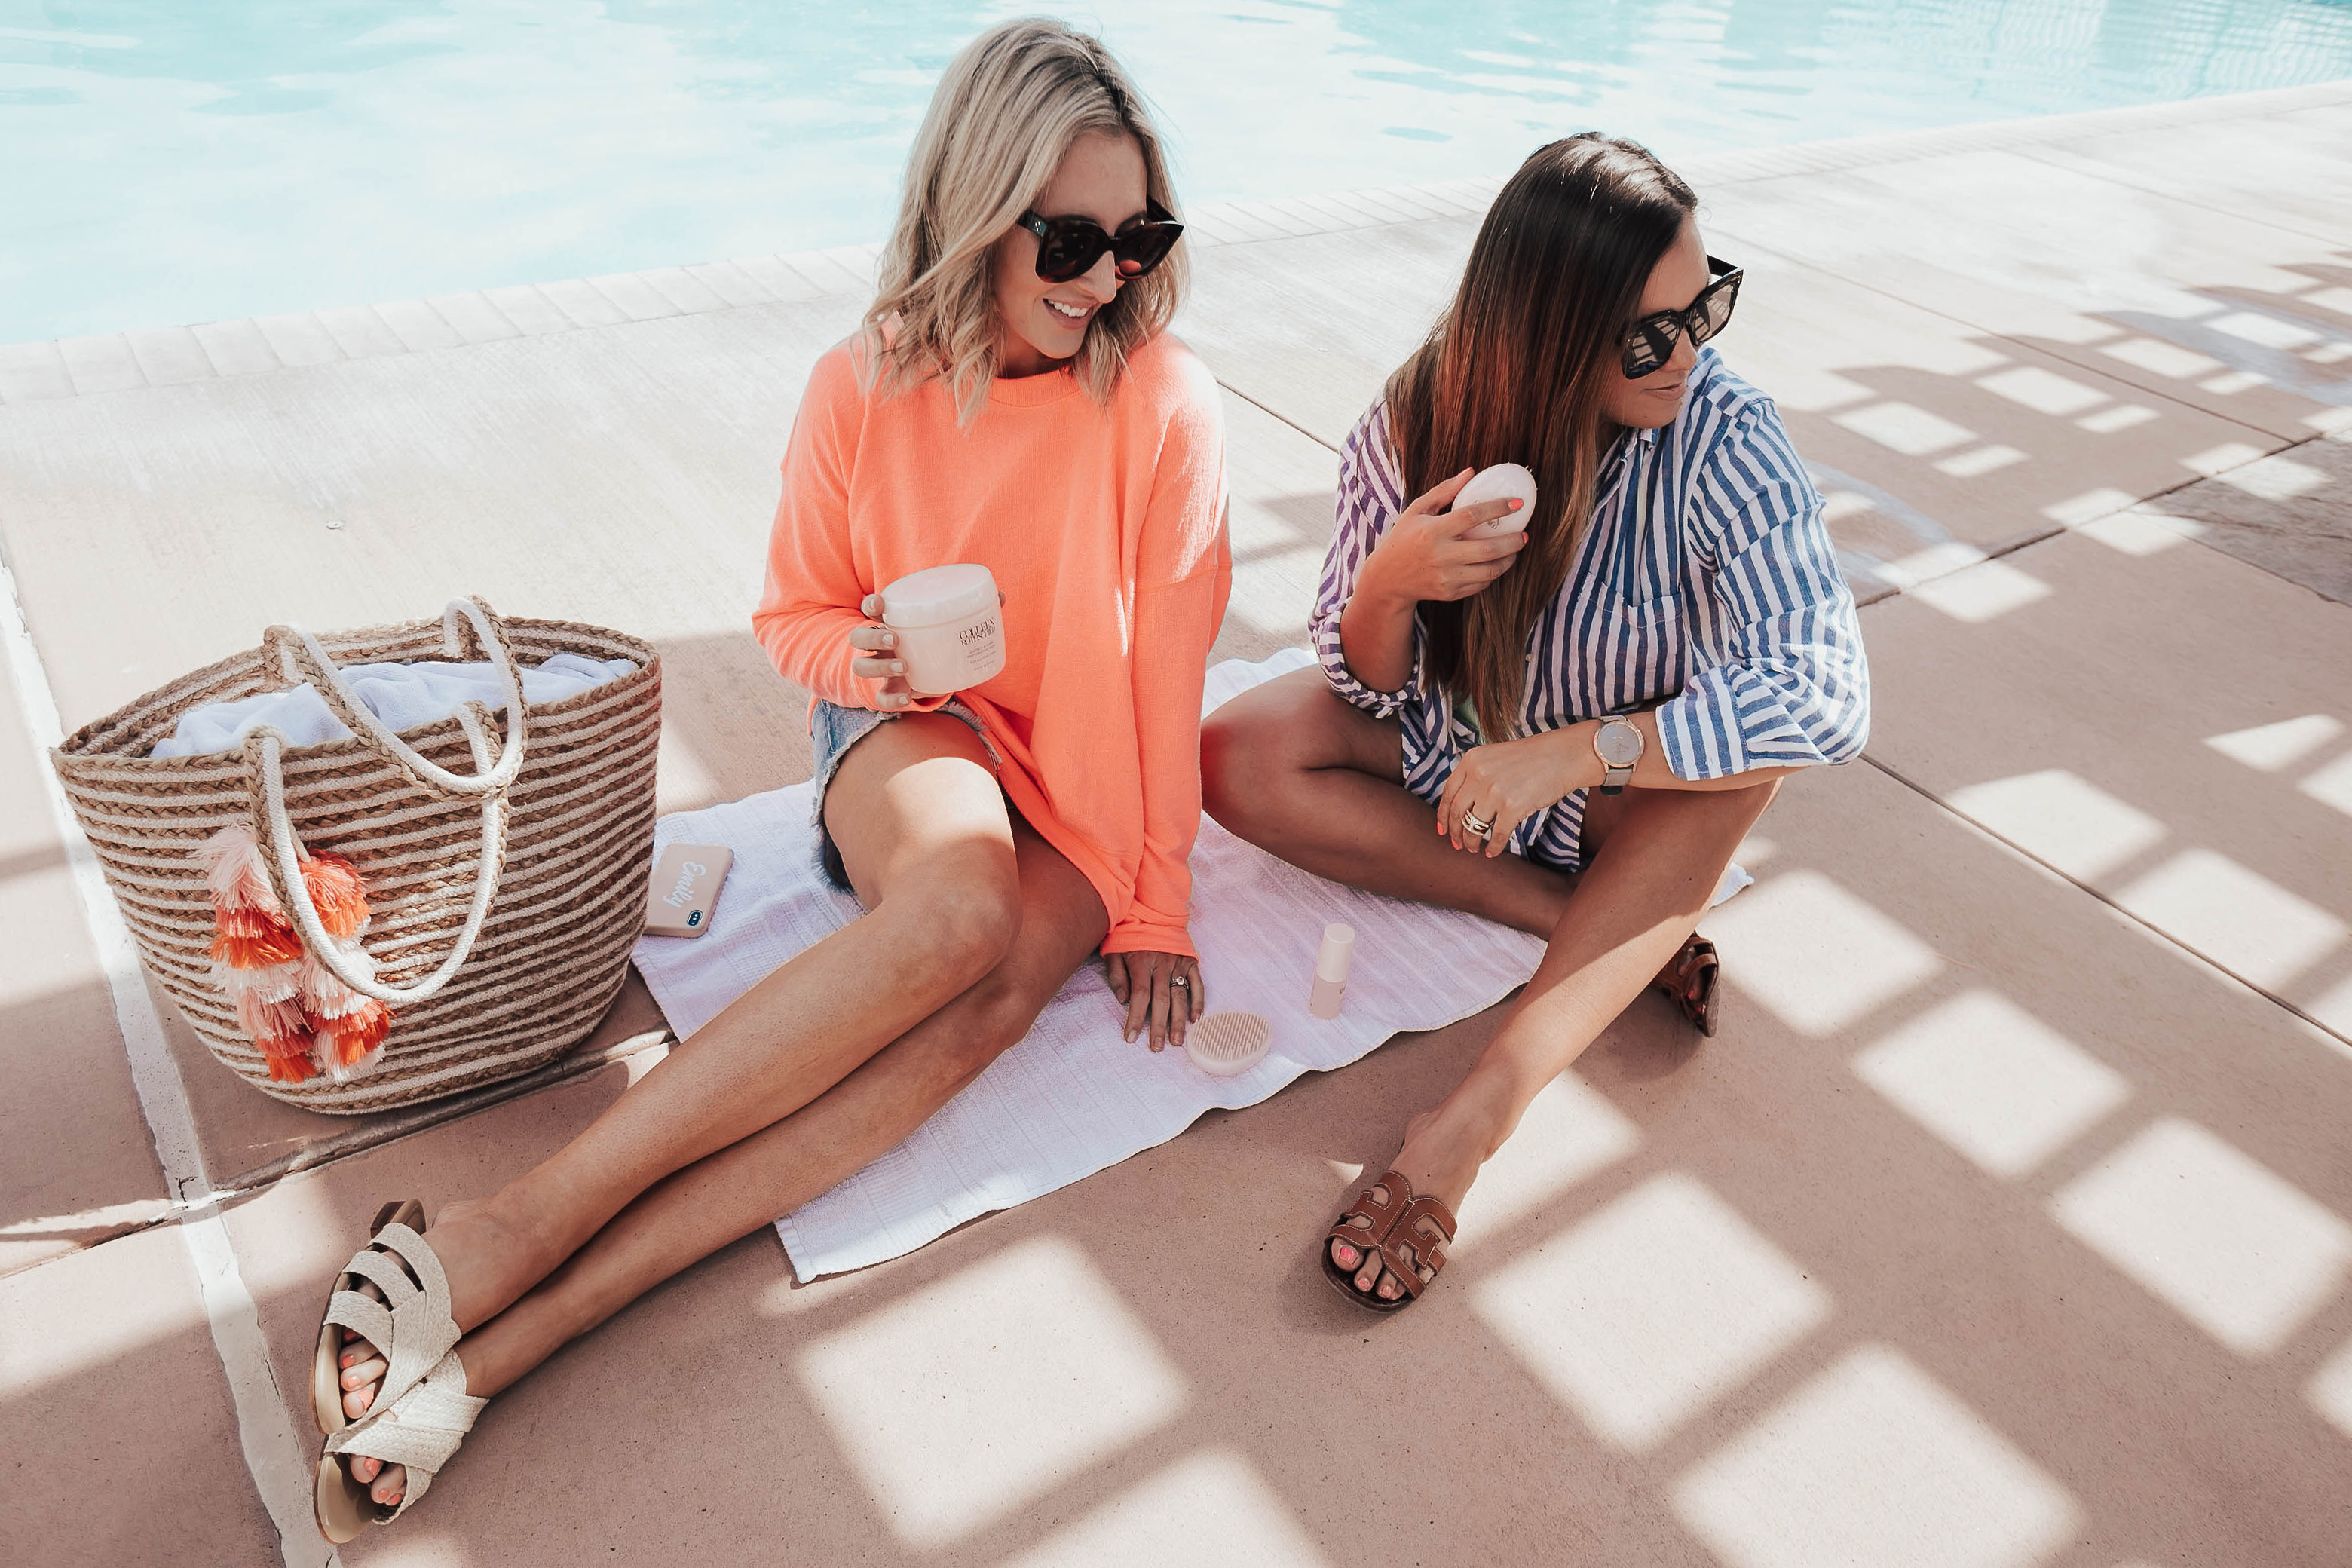 Beauty and Fashion Bloggers, Emily Farren Wieczorek and Ashley Zeal talk about their favorite products for Healthy Summer Hair!